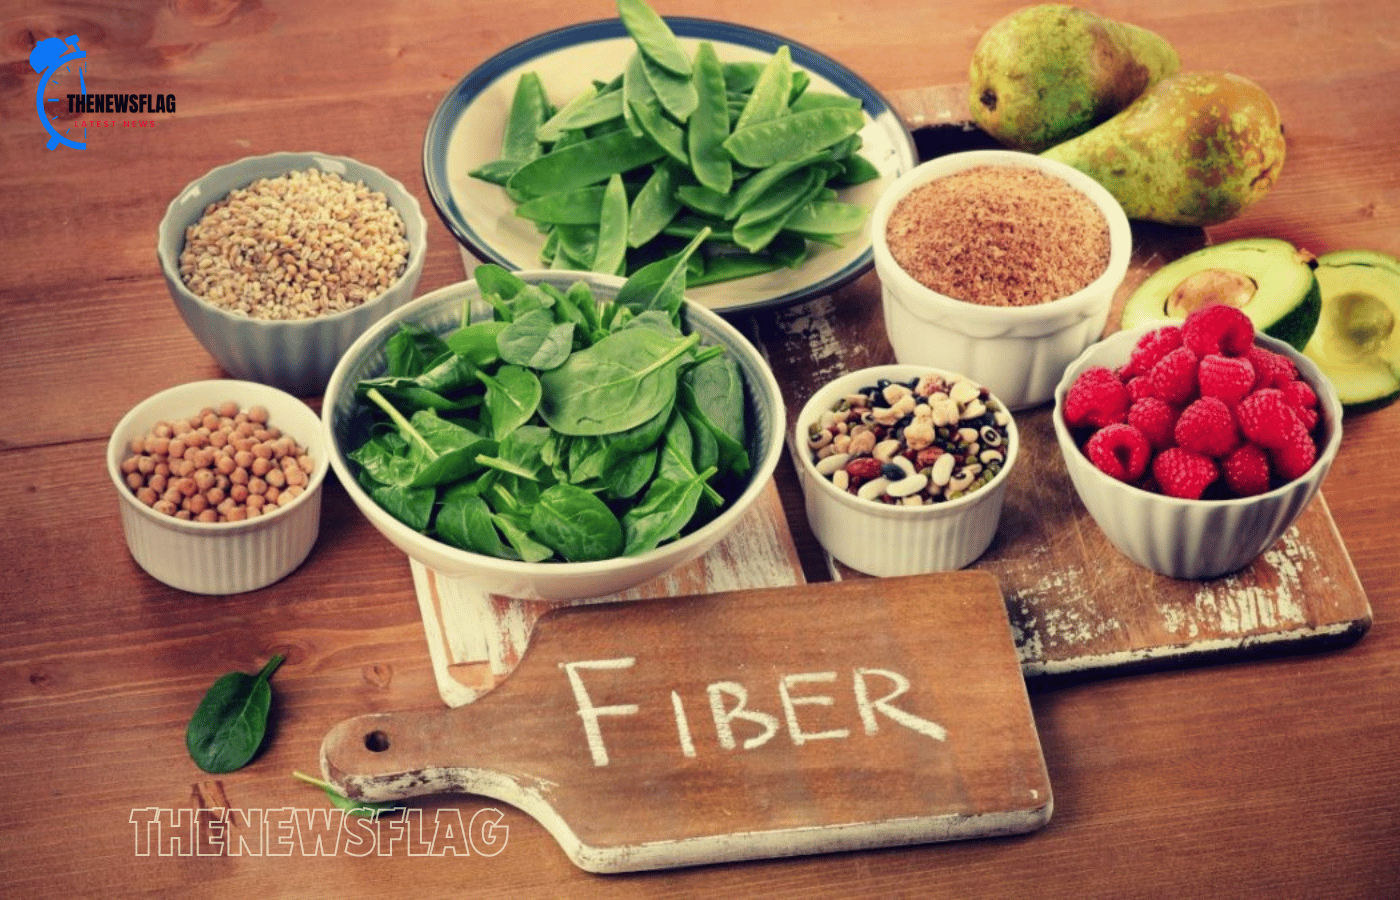 Research: Including a Fibre Supplement in Your Daily Diet May Help Seniors' Brain Function